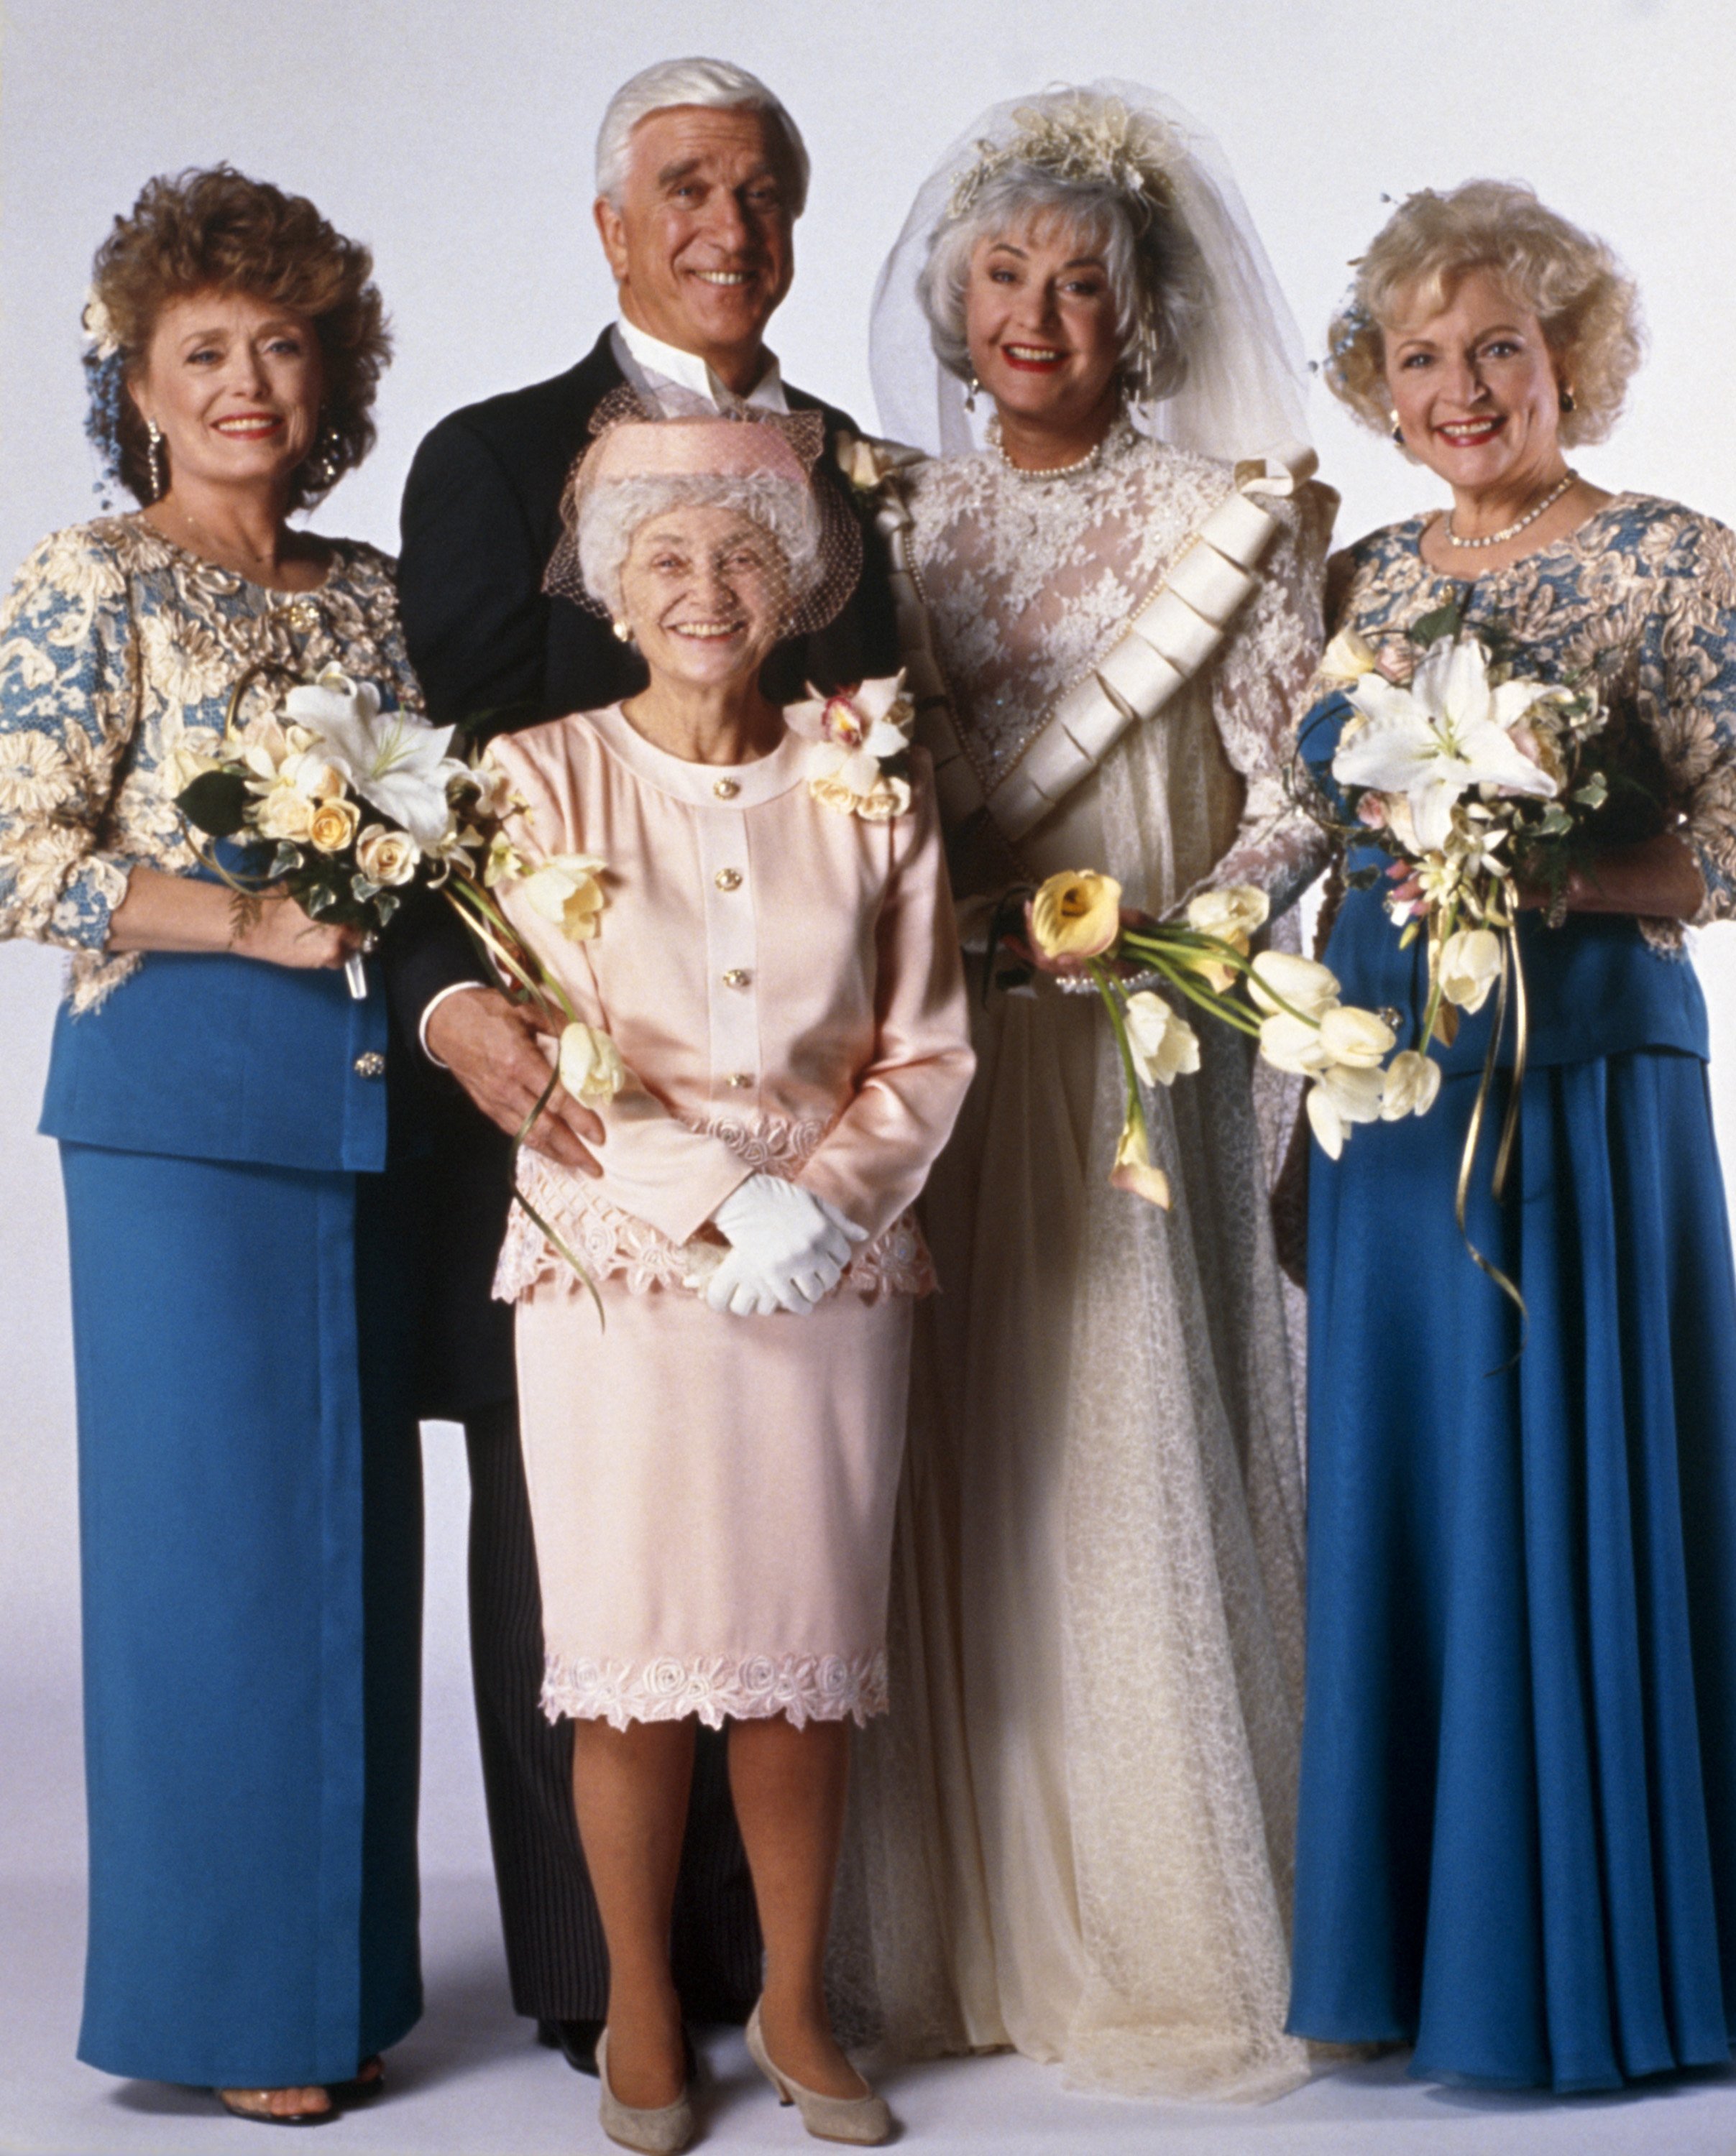 Rue McClanahan in a blue bridesmaid dress, Estelle Getty in a pink dress, Leslie Nielsen in a tuxedo, Bea Arthur in a white wedding dress, and Betty White in a blue bridesmaid dress in a photo from 'The Golden Girls.'